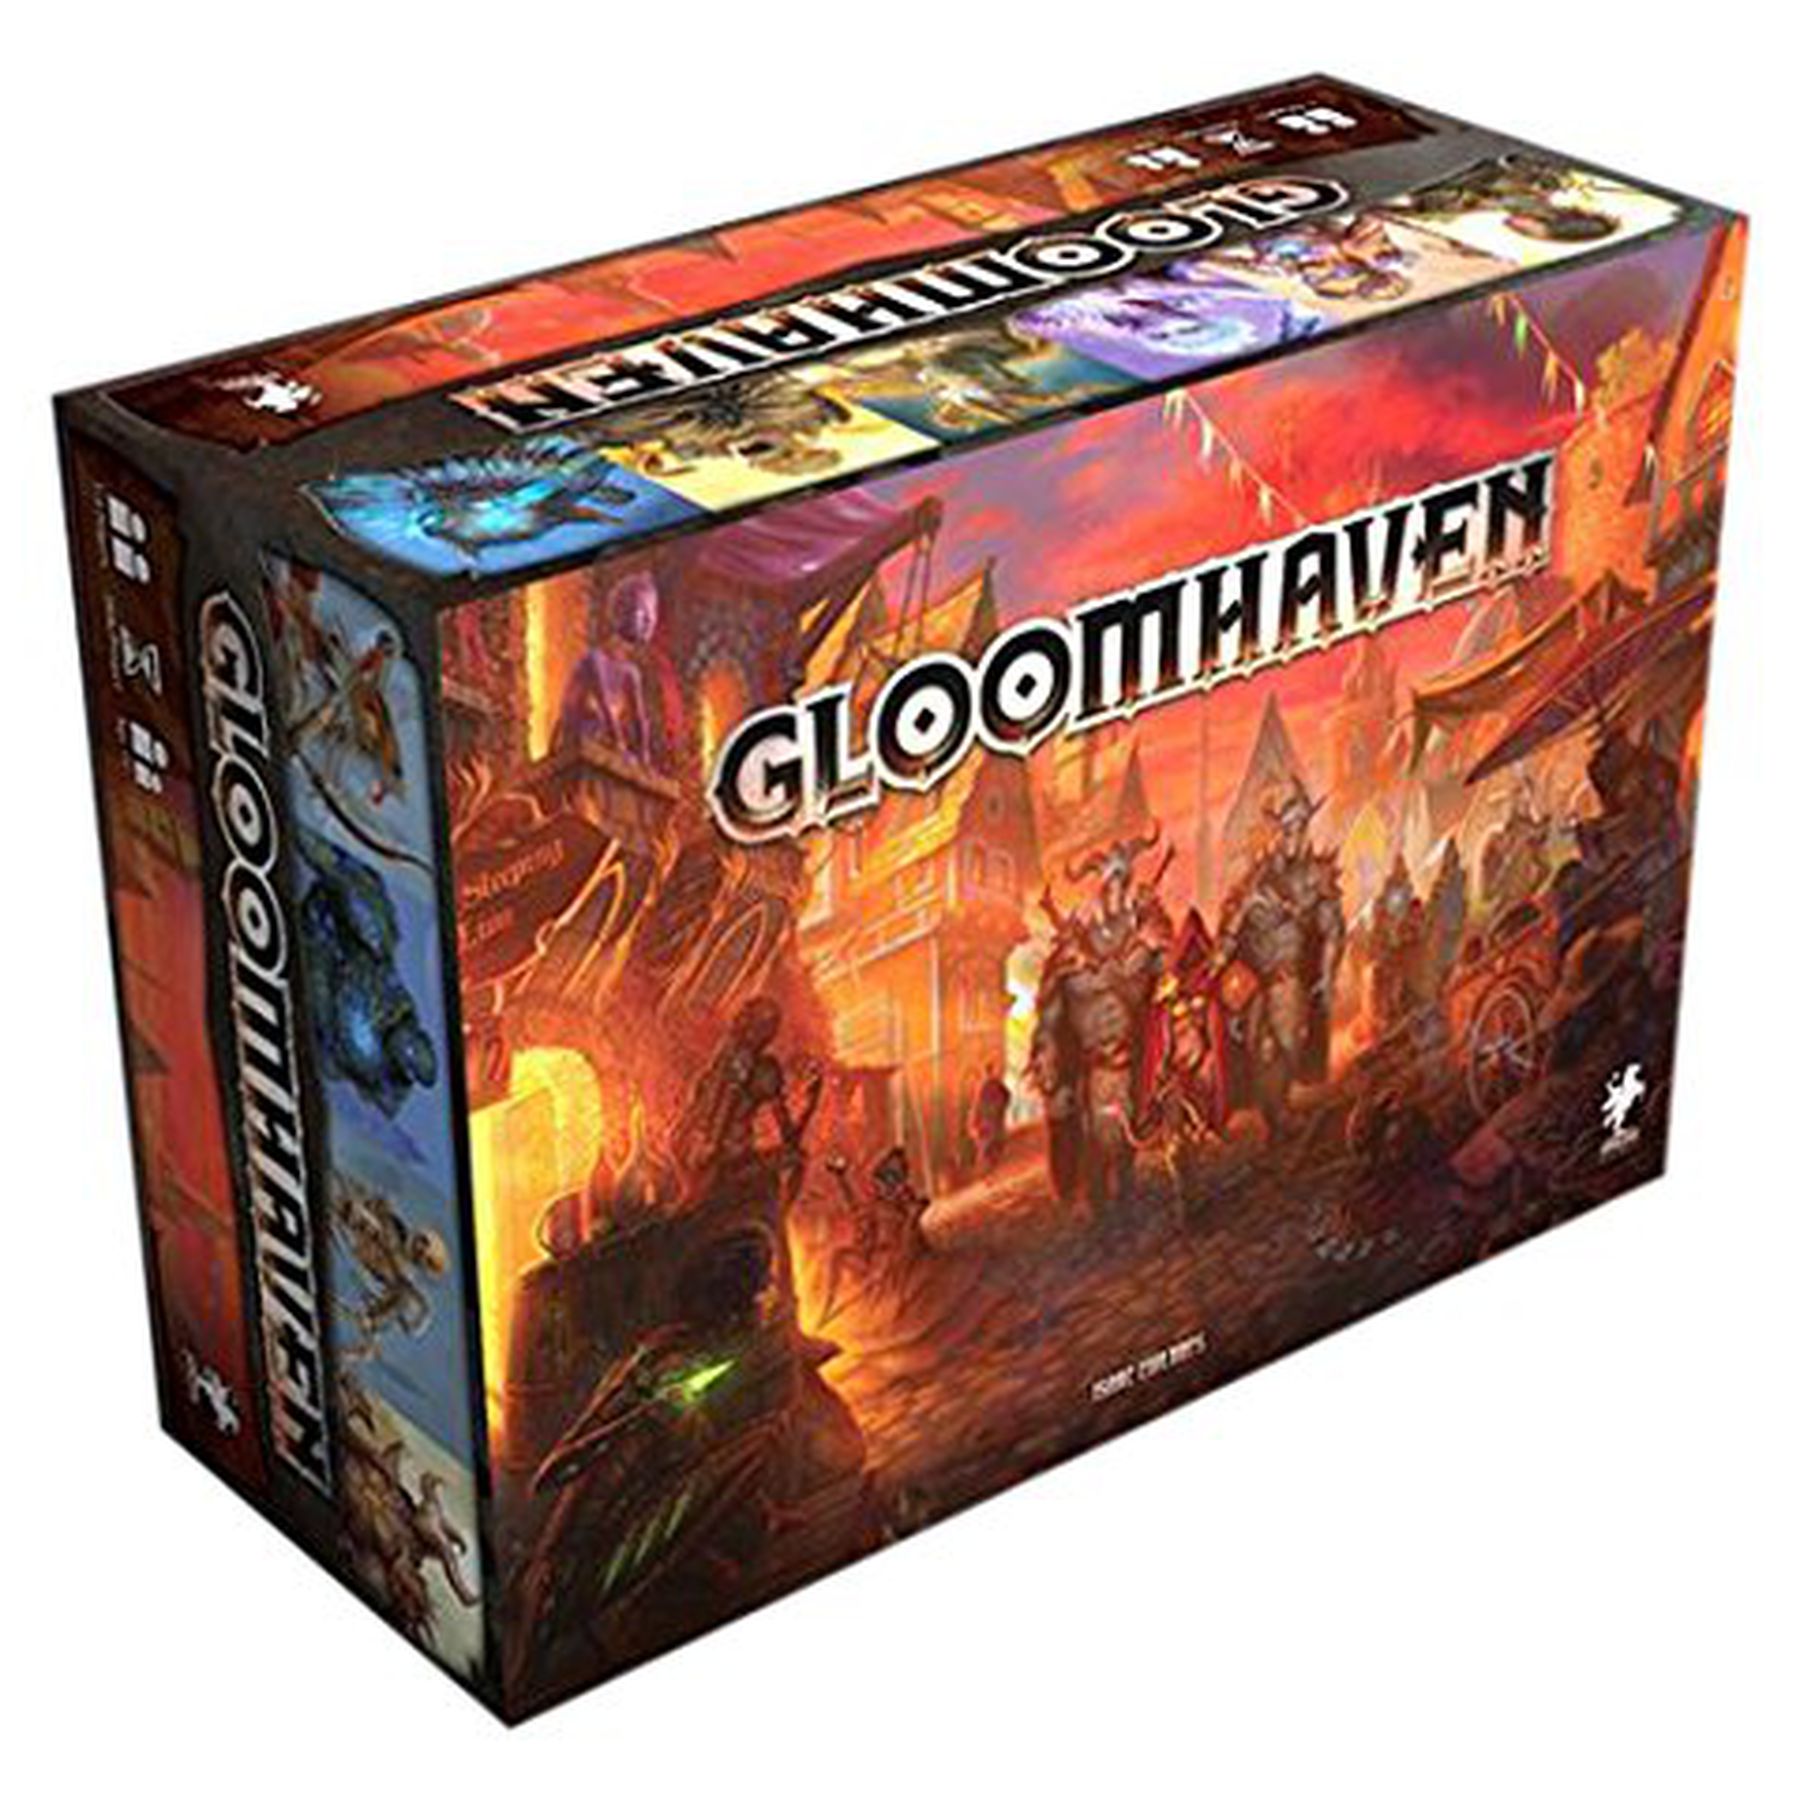 GLOOMHAVEN CABINET x2 scenery expansion plastic 3D Board game kickstarter 